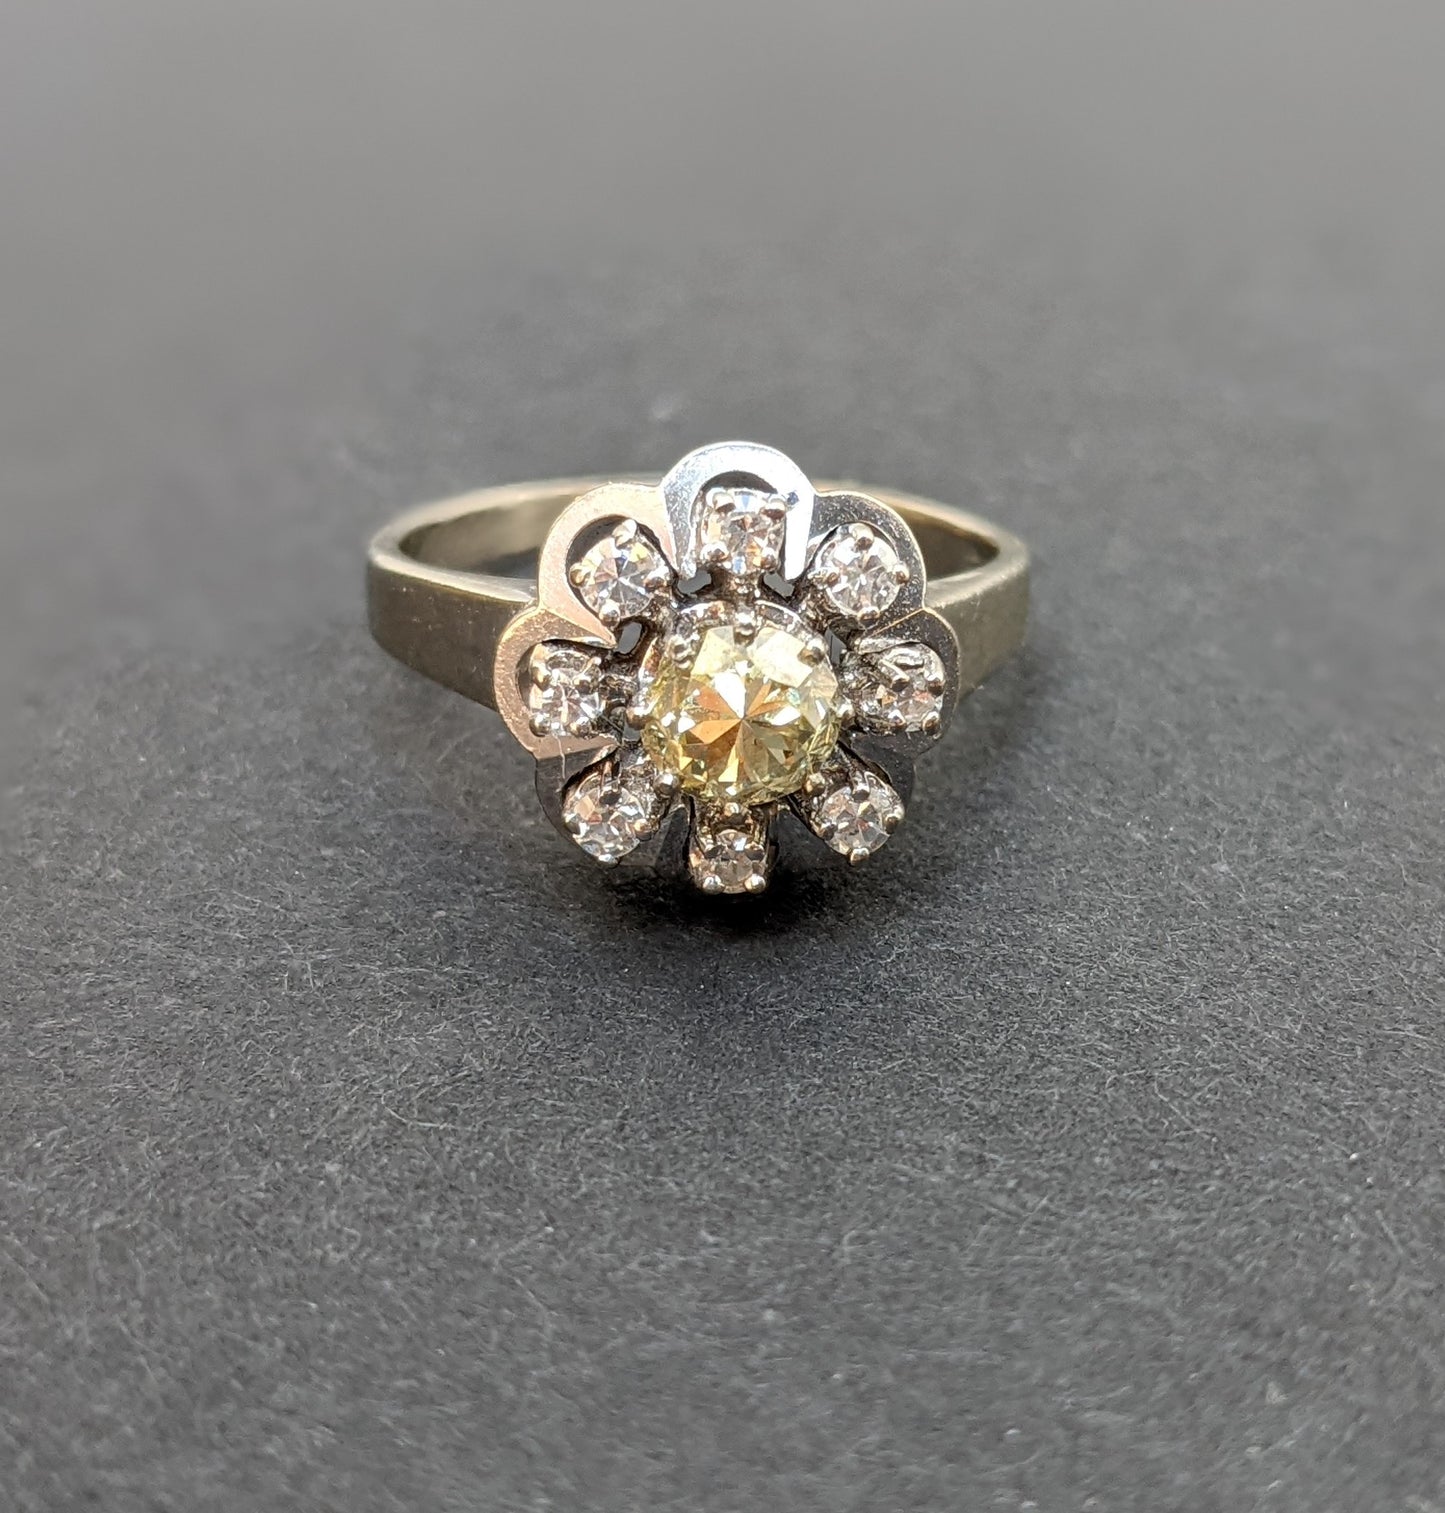 14kt white gold Old European Cut Canary diamond ring with halo